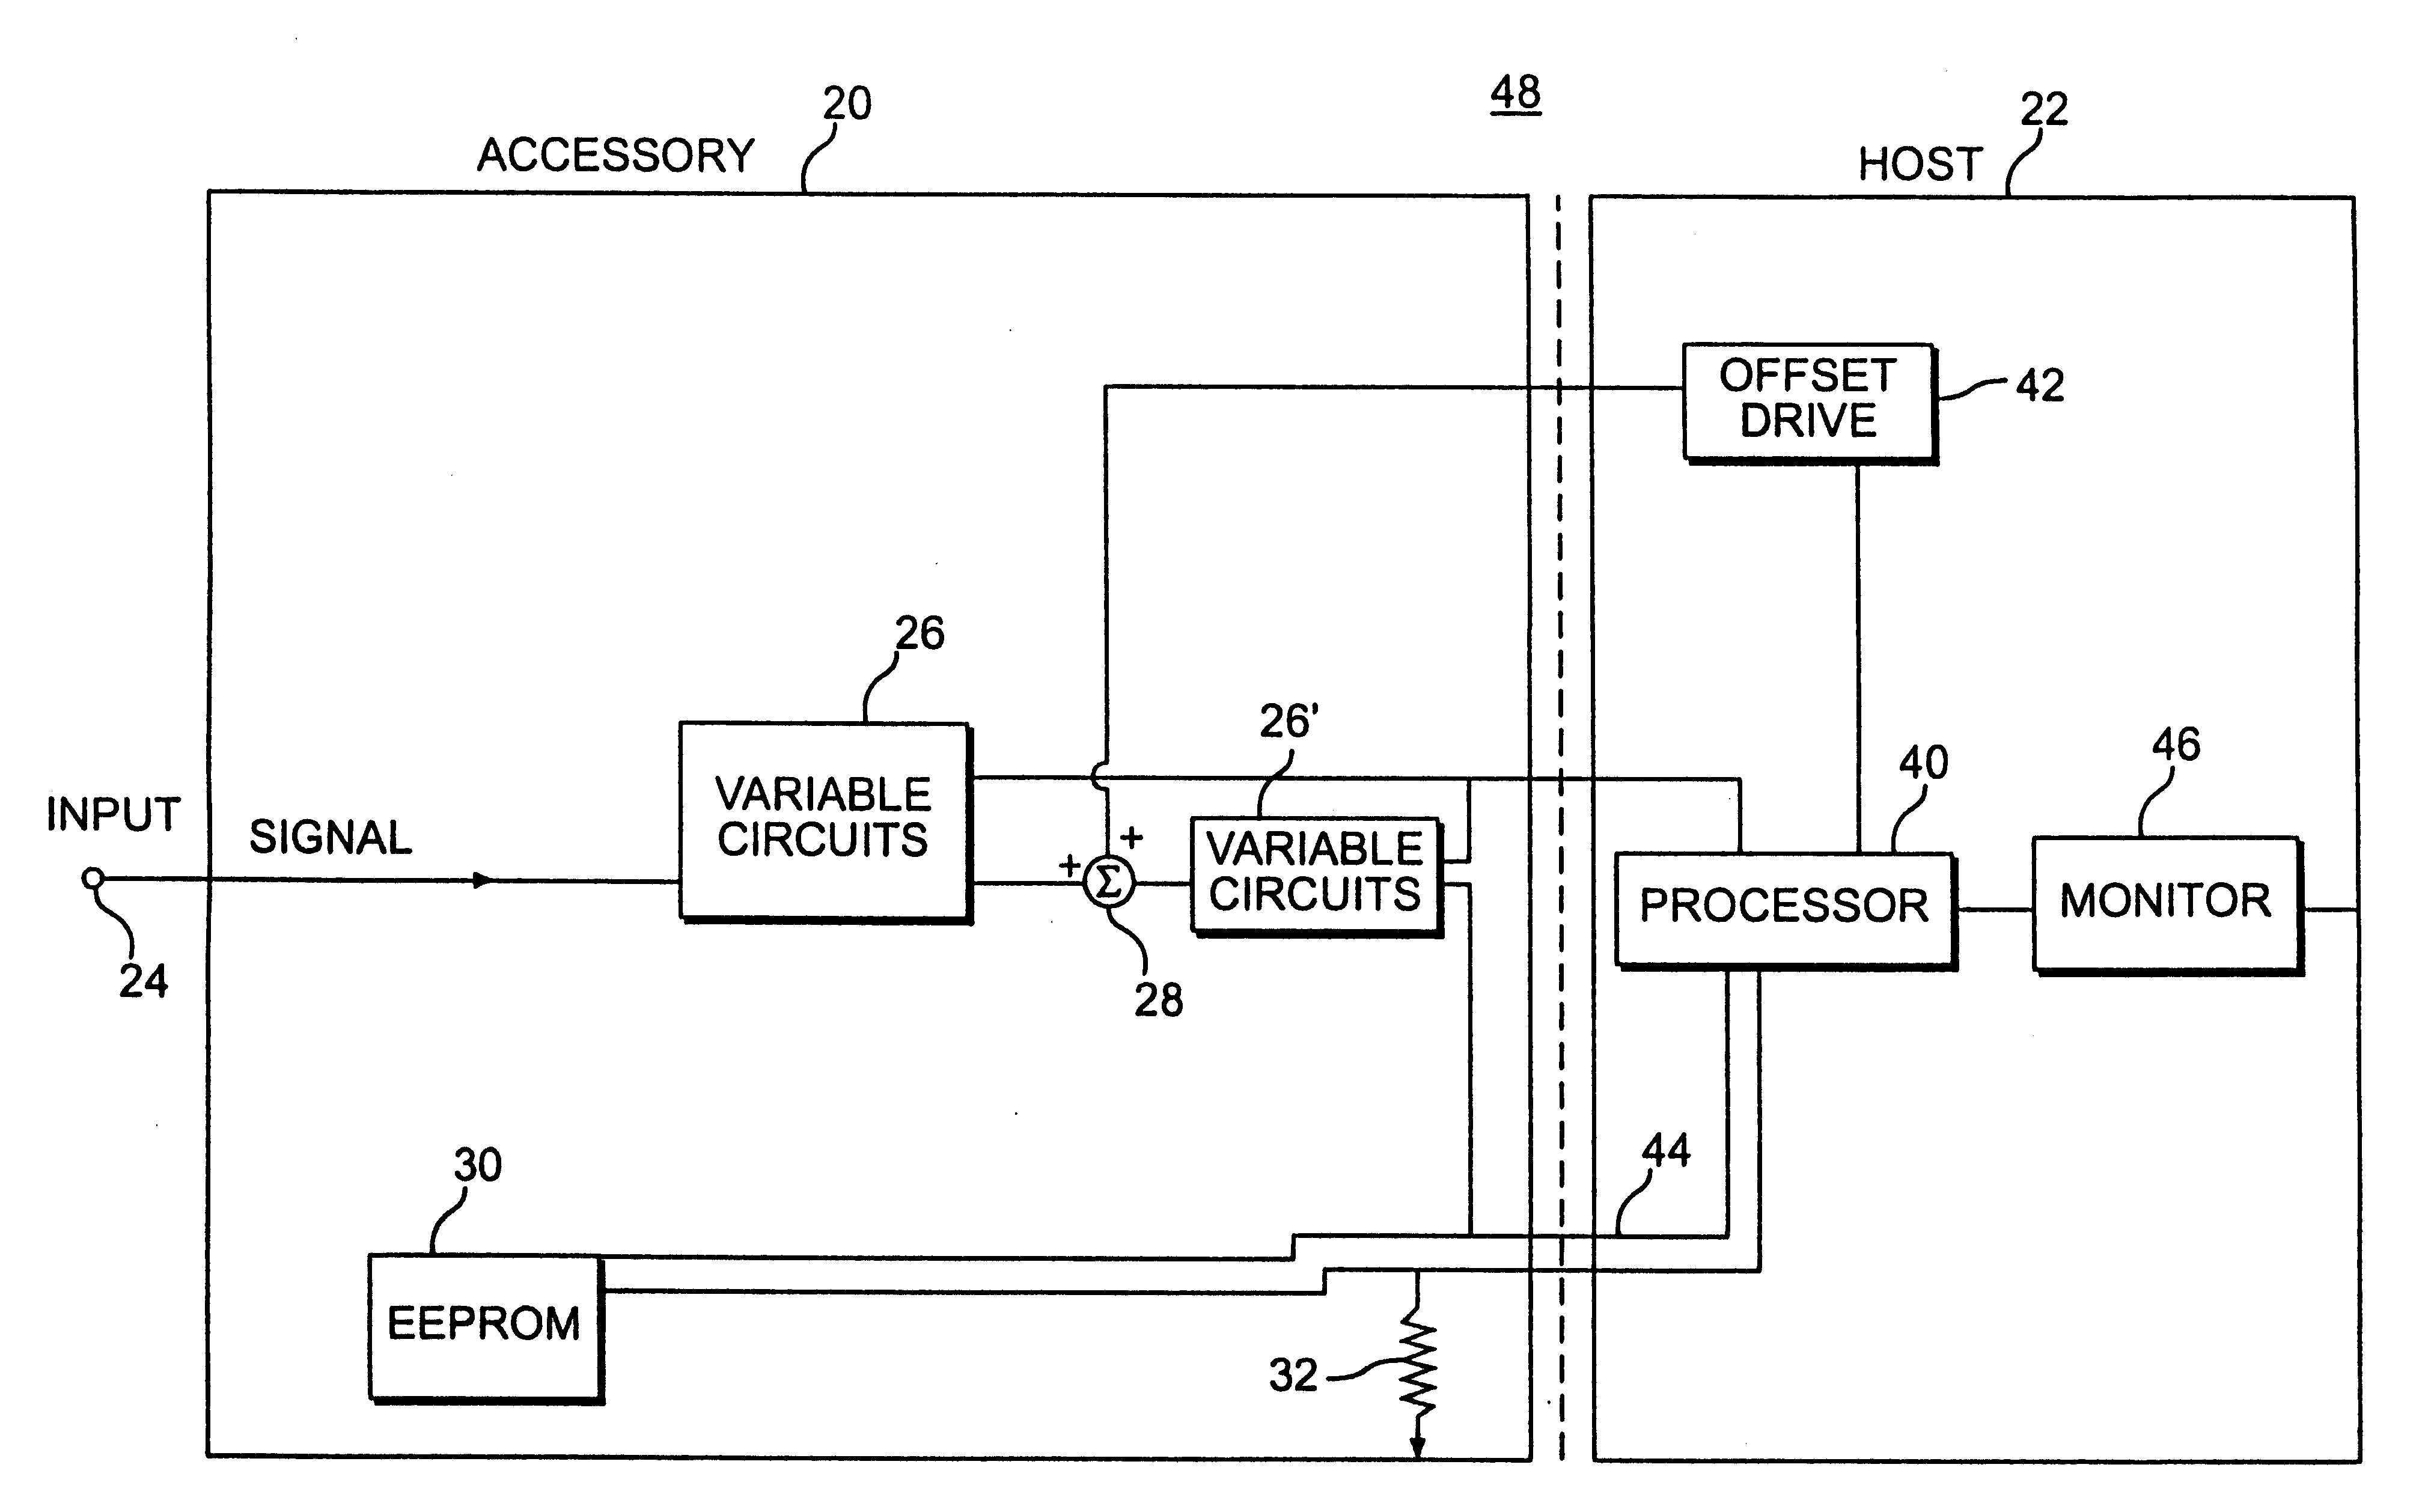 Accessory with internal adjustments controlled by host